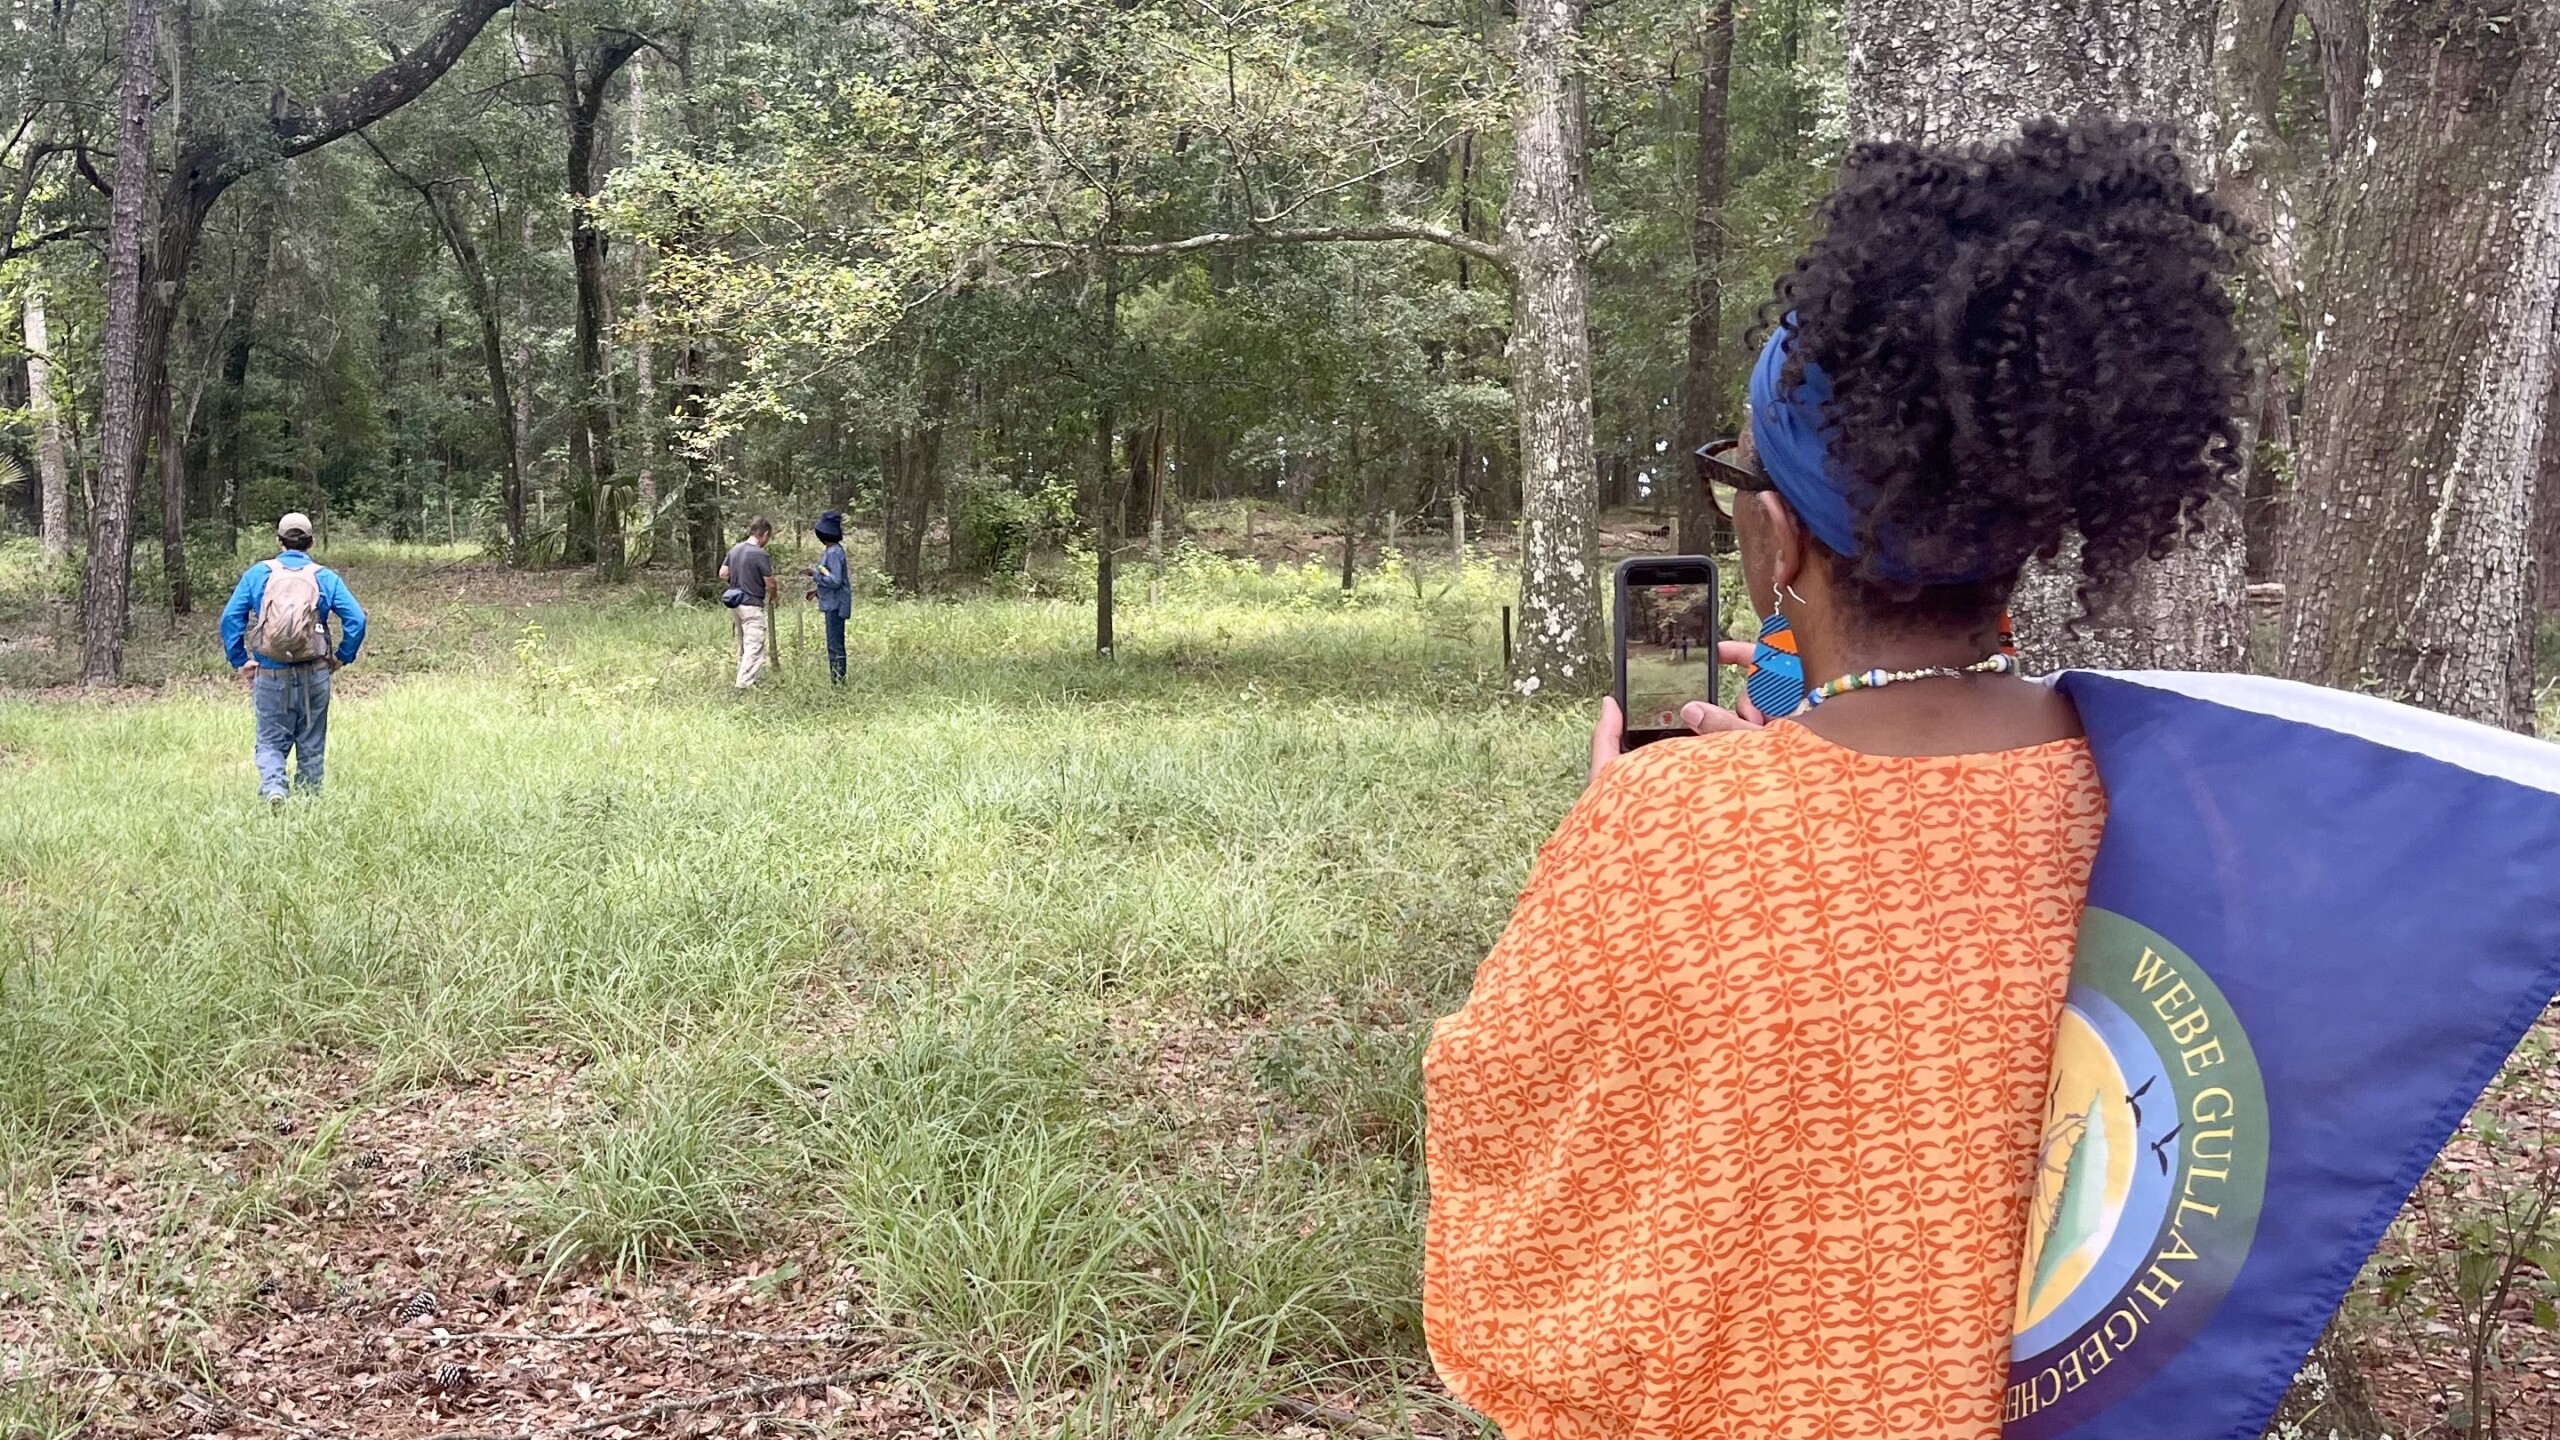 Featured image for “Gullah/Geechee families fight to protect burial sites in Nassau County’s Wildlight development”